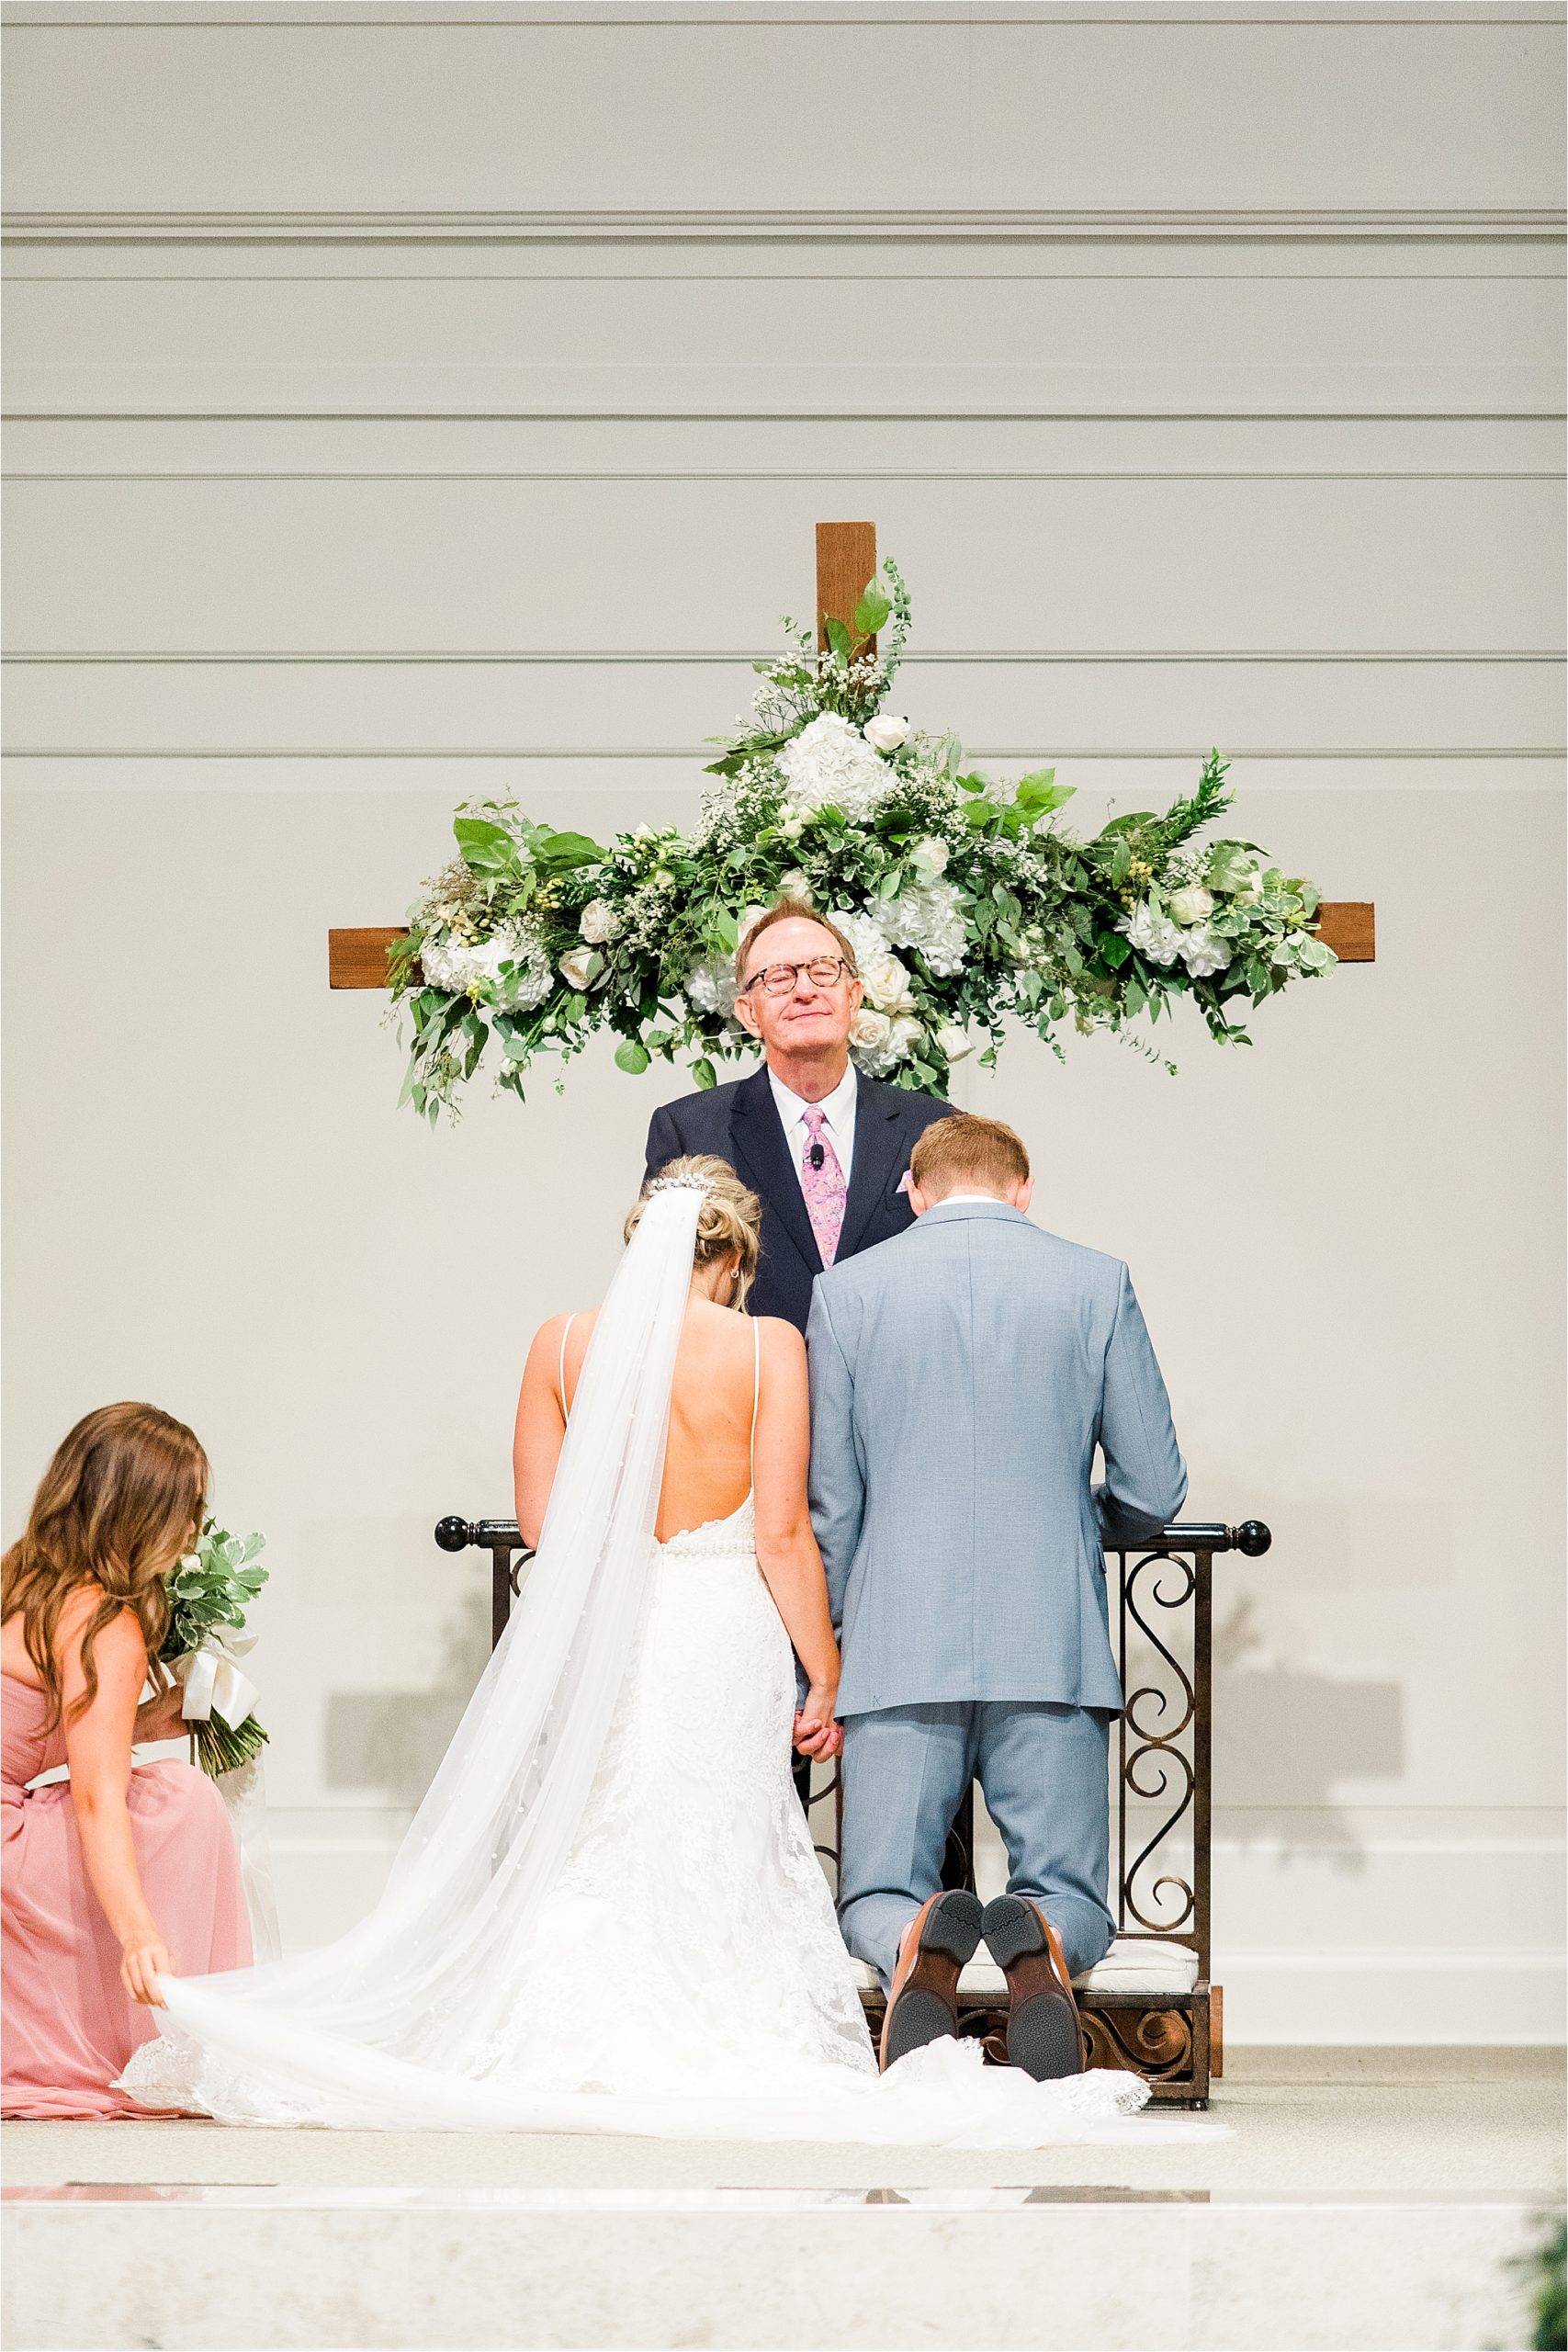 A bride and groom kneel before the cross as her bridesmaid adjusts her train during her prestonwood chapel ceremony in Plano, Texas 